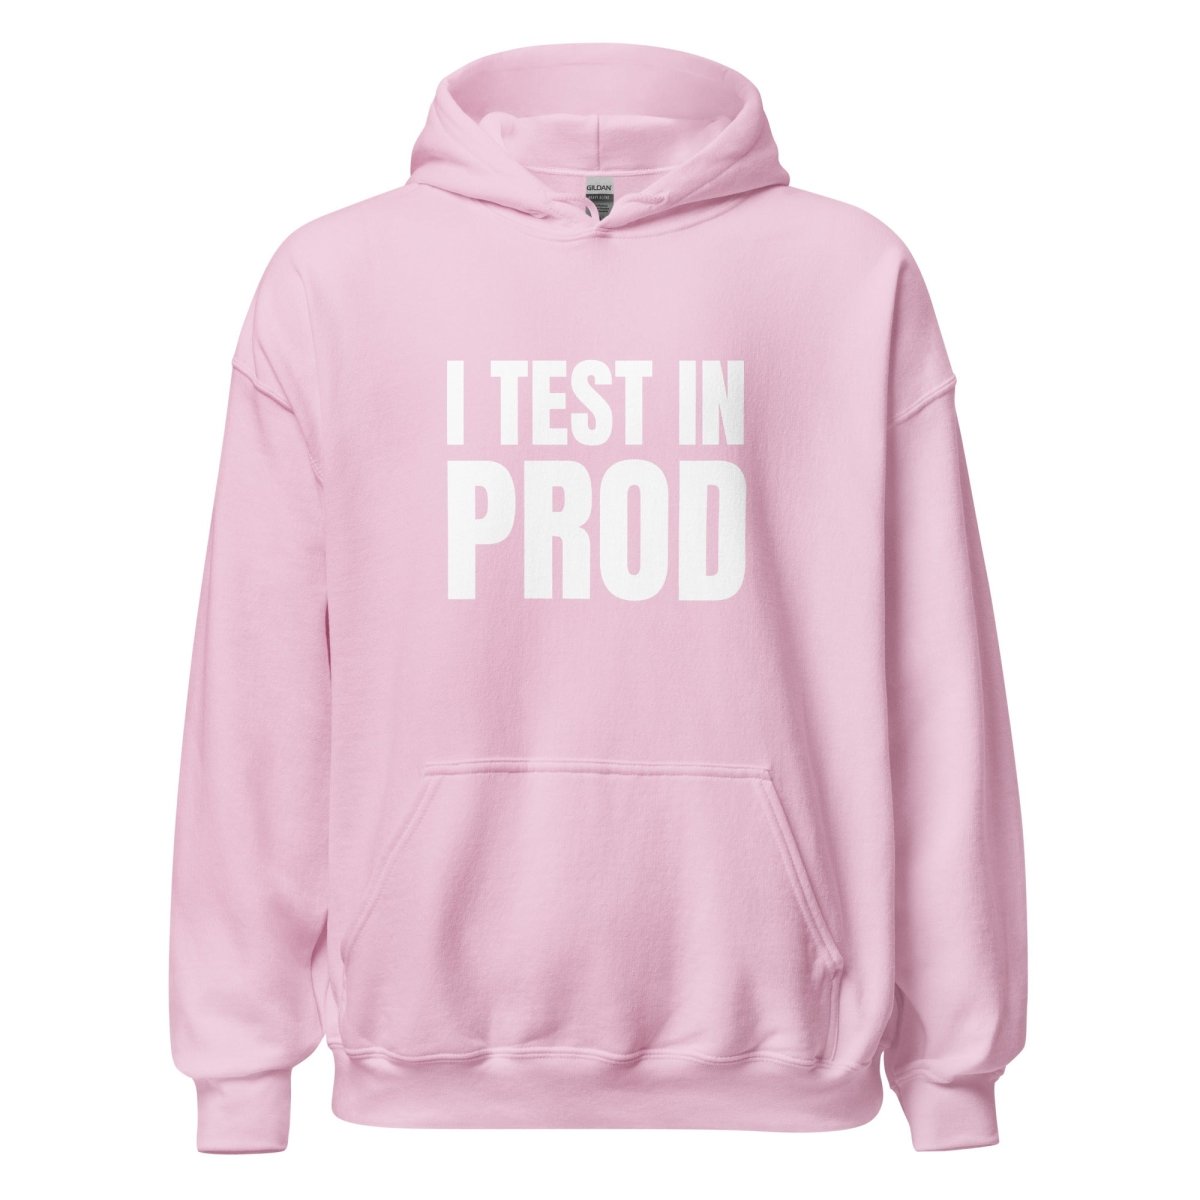 I Test in Prod Hoodie (unisex) - Light Pink - AI Store